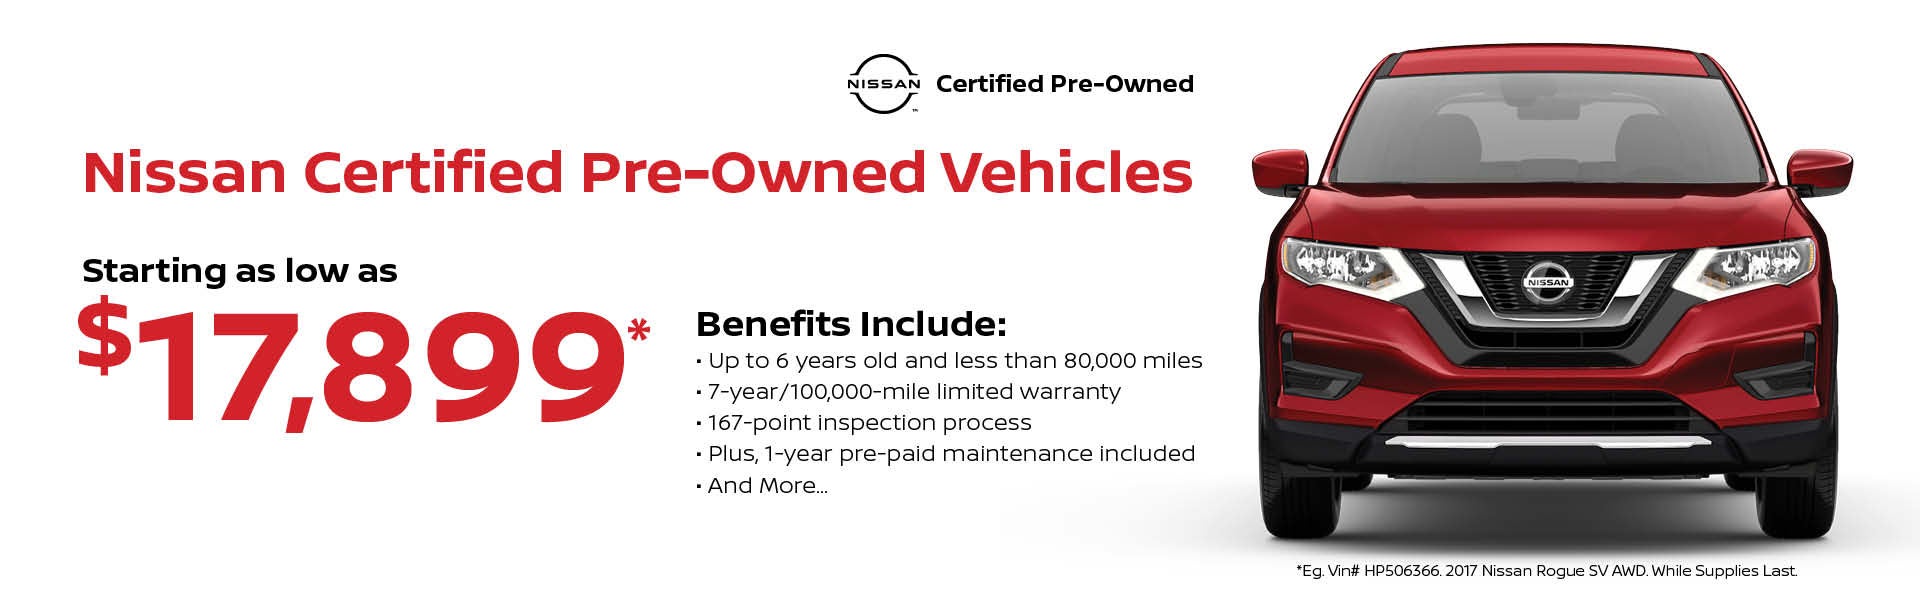 Certified Vehicles